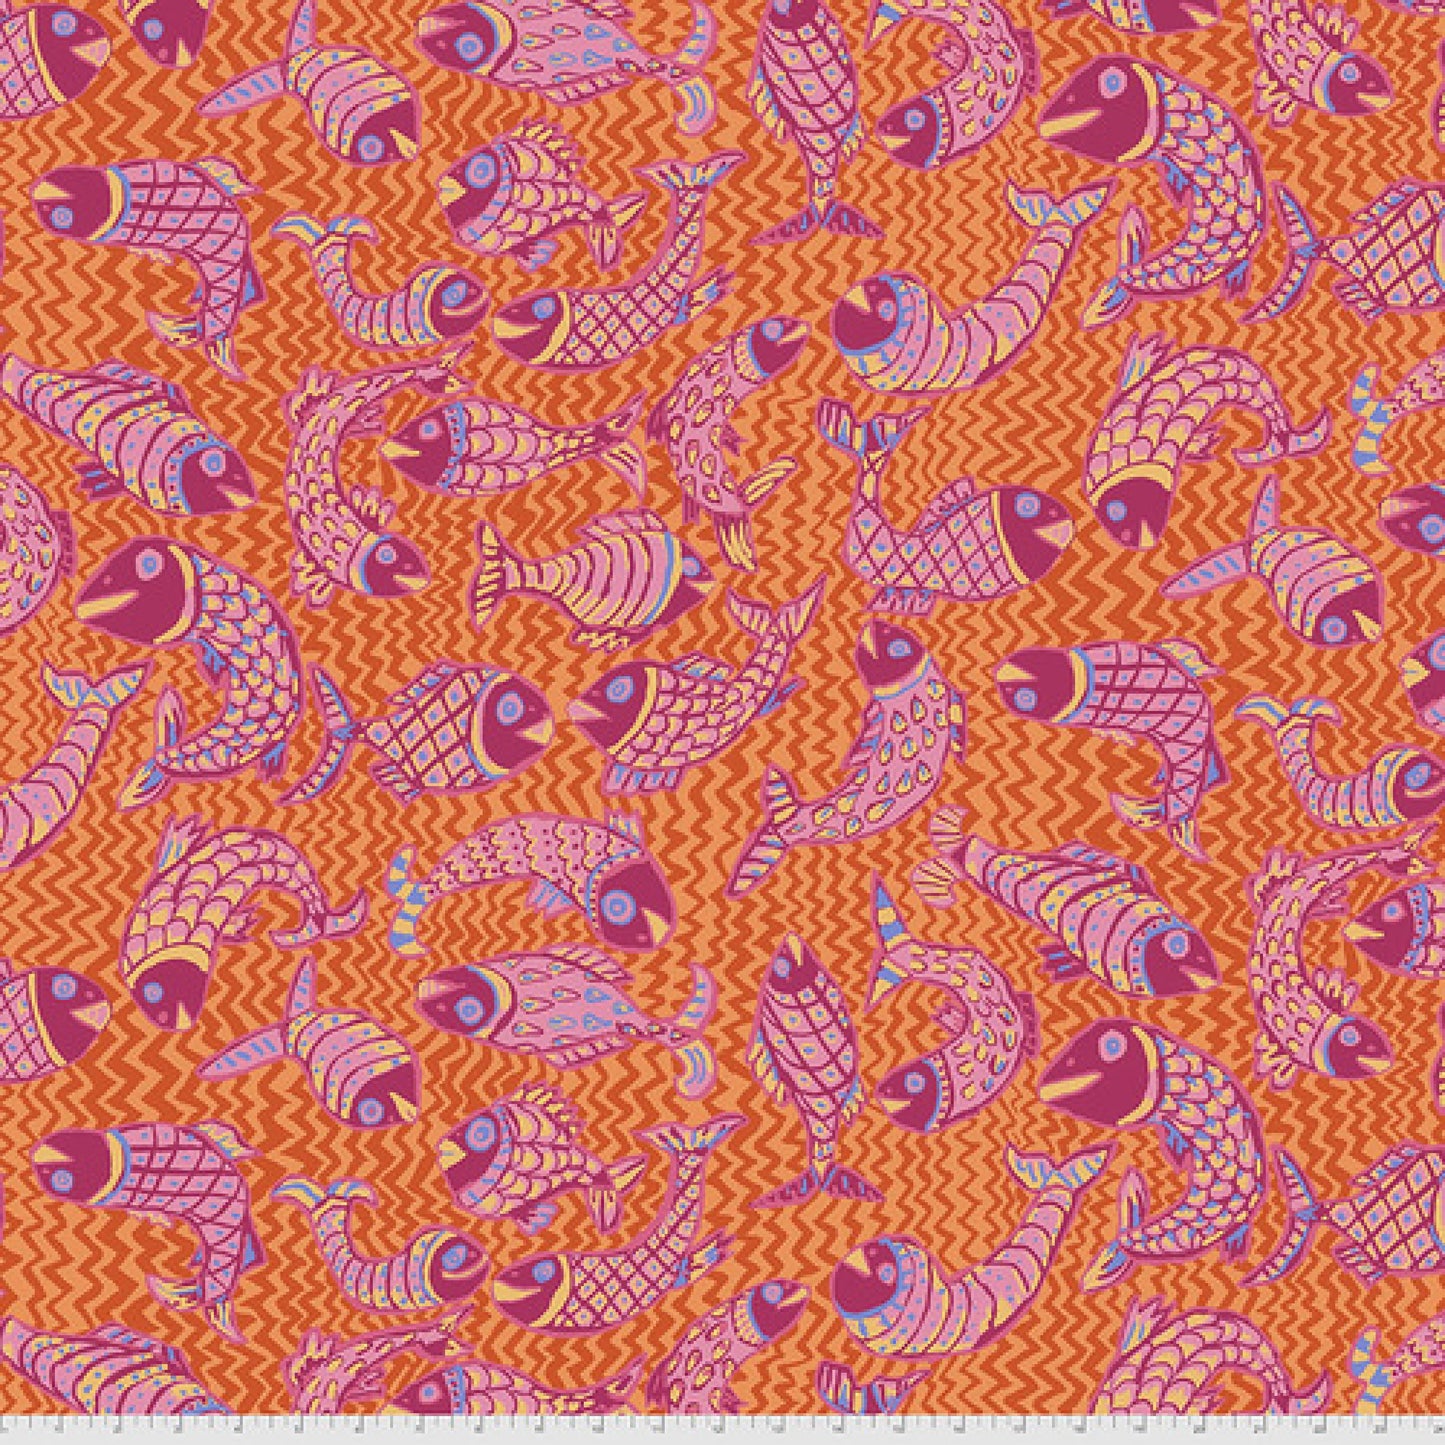 Koi Polloi - Brandon Mably - Kaffe Fassett Collective August 2021 - PWBM079 - 100% Quilters Cotton